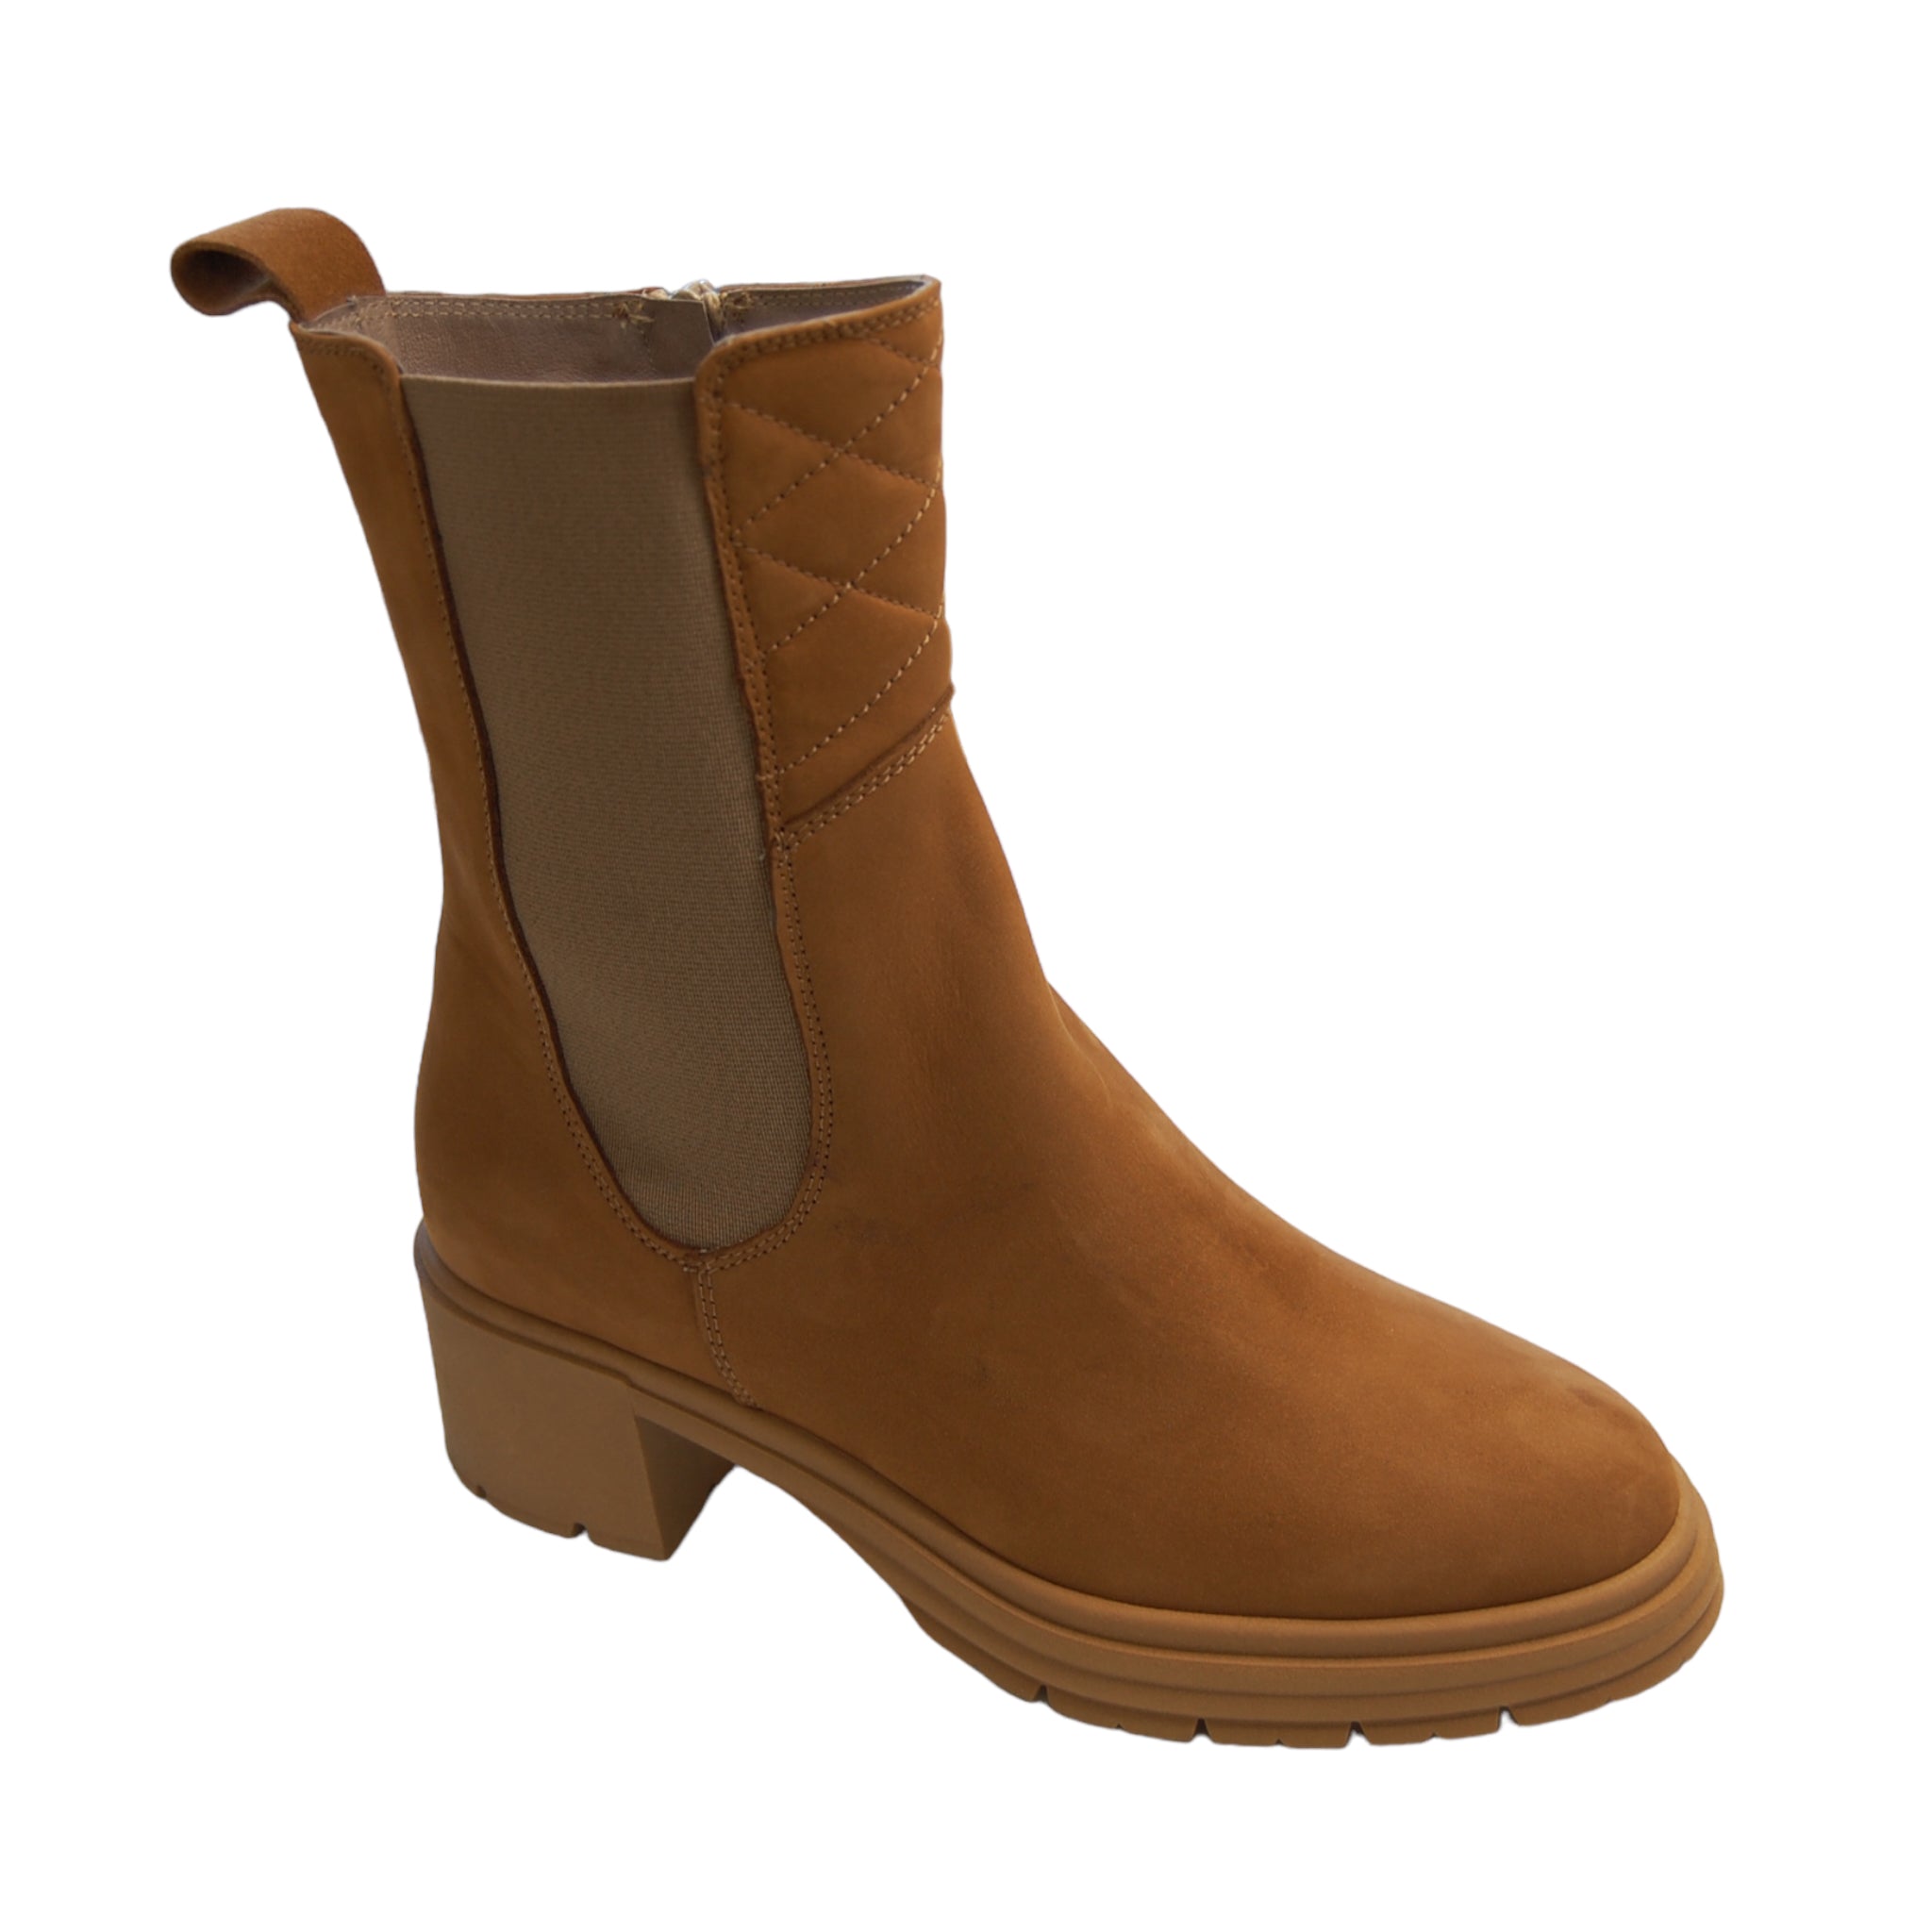 DL Sport Nubuck Leather Ankle Boots Tan